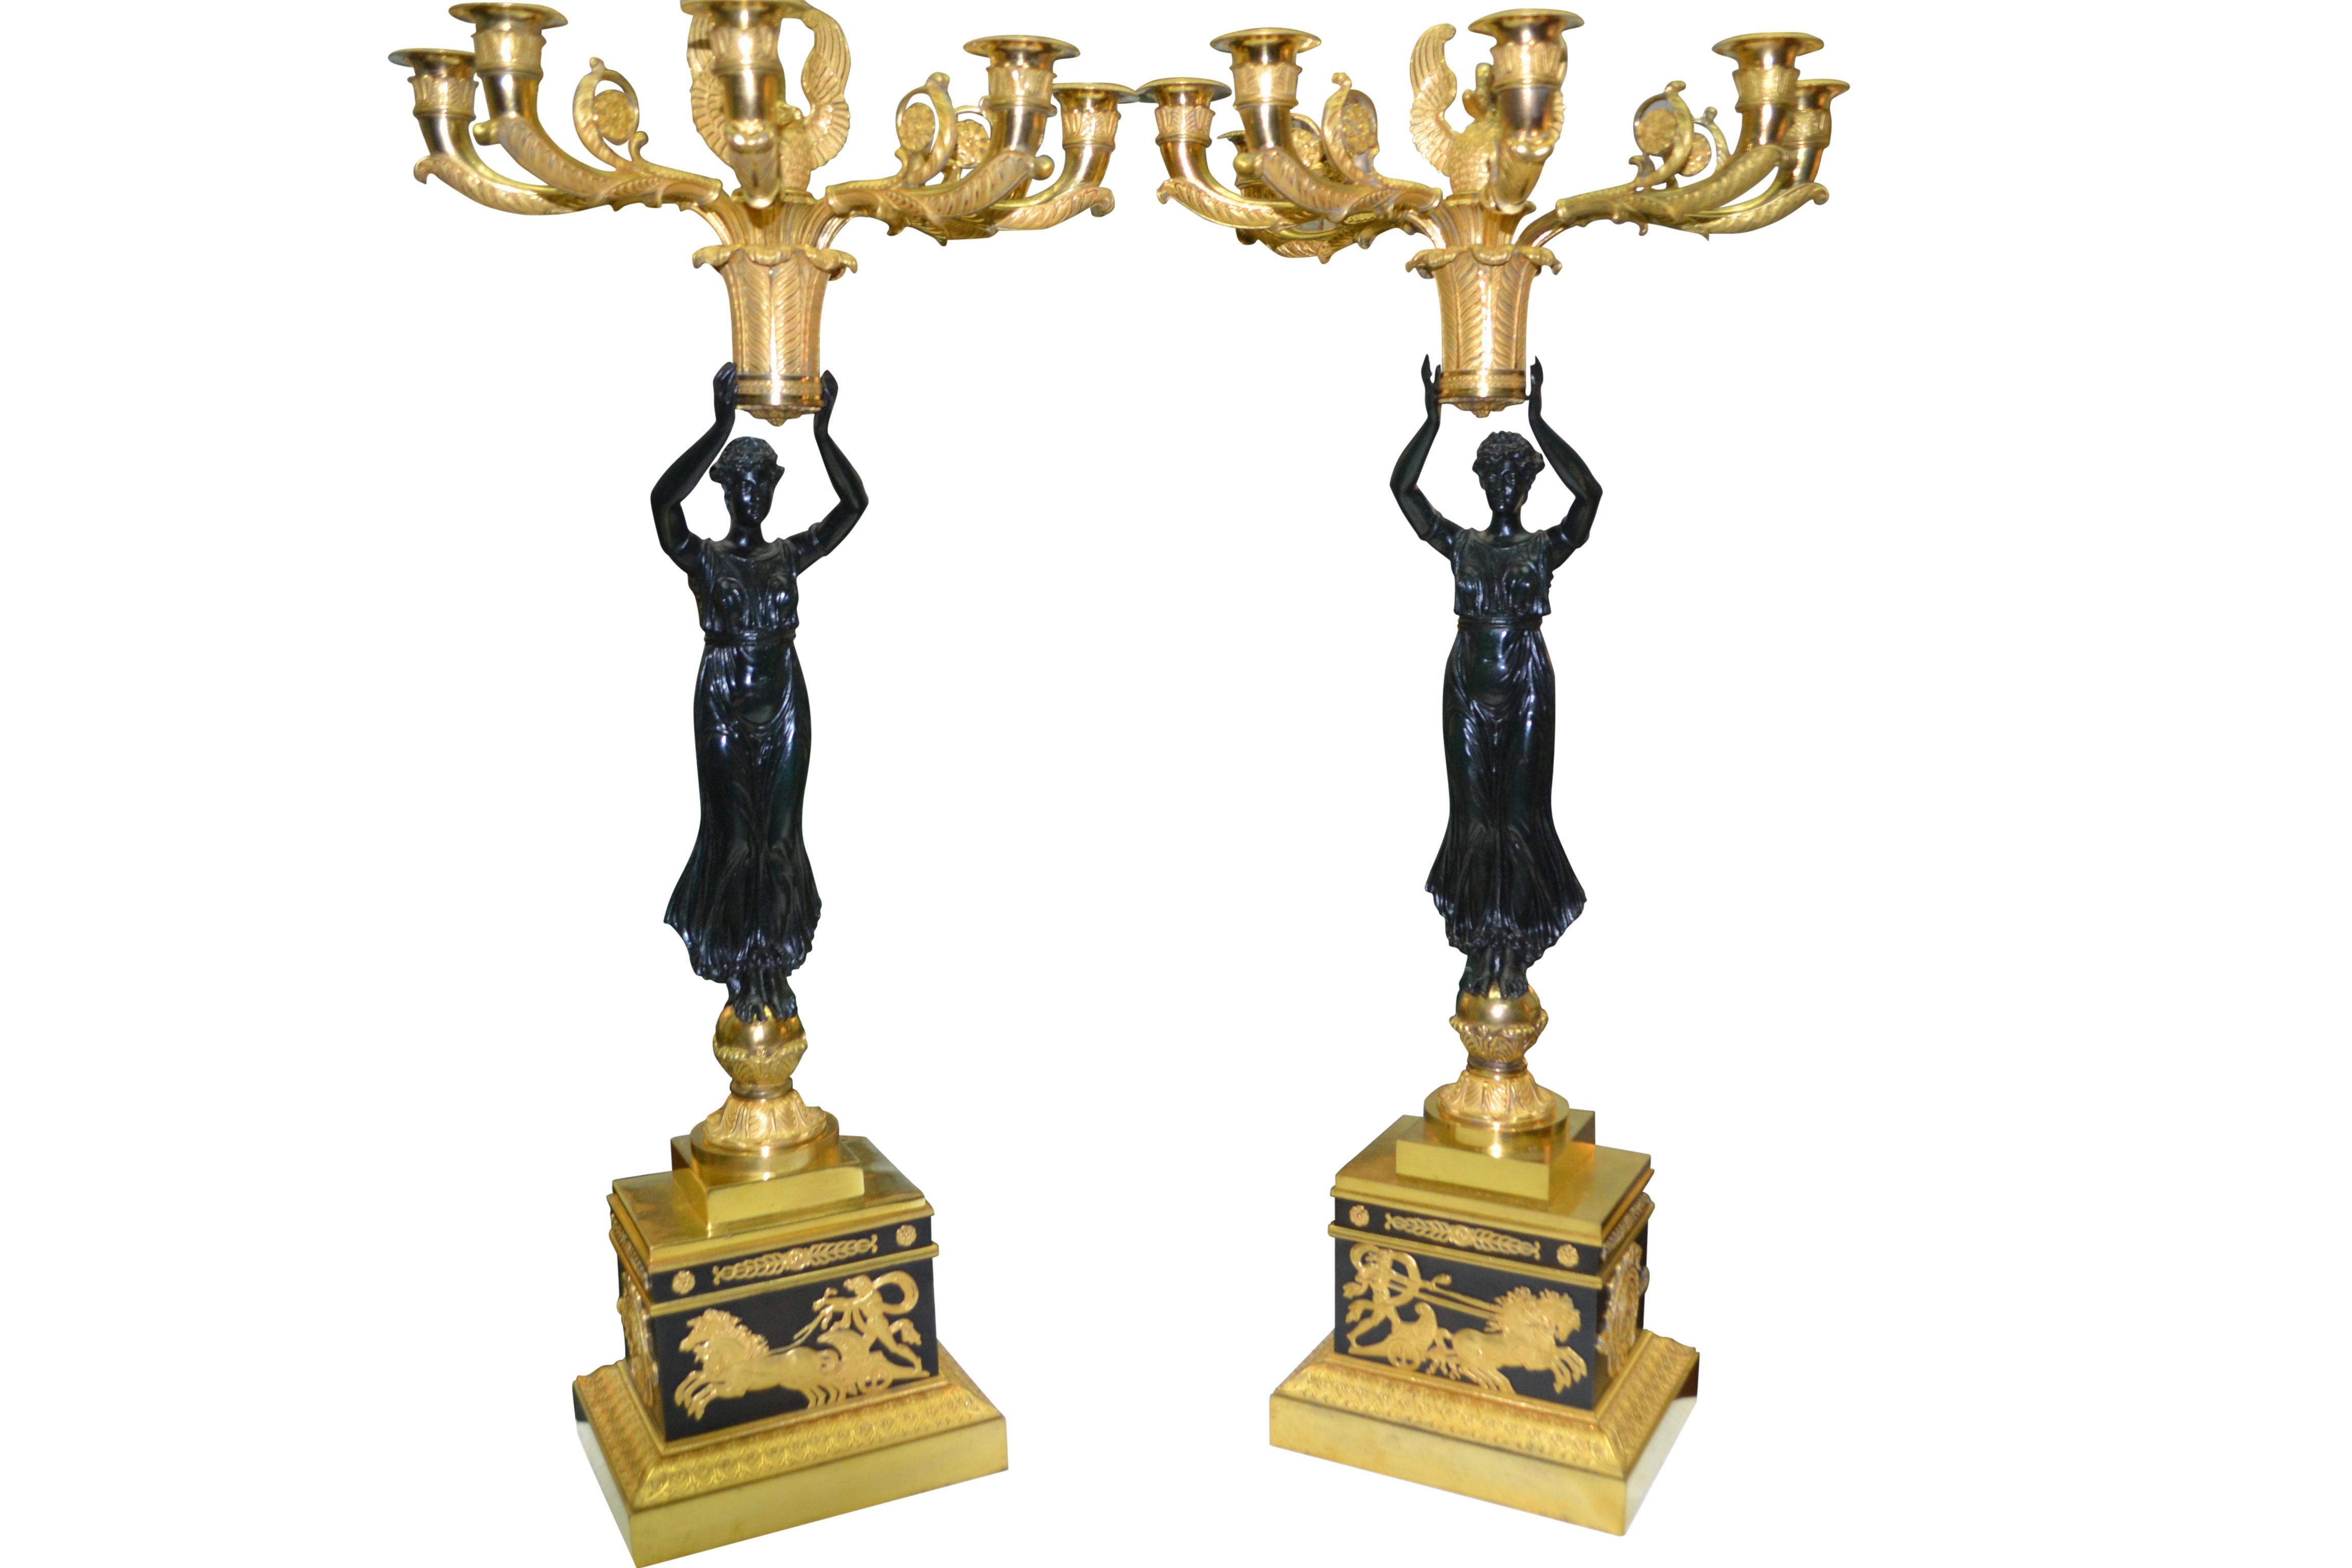 These are a pair of exceptional early French Empire candelabra featuring patinated bronze classically draped maidens holding aloft a gilt bronze plumed basket supporting six candle arms capped by a most unusual open winged swan finial. The whole